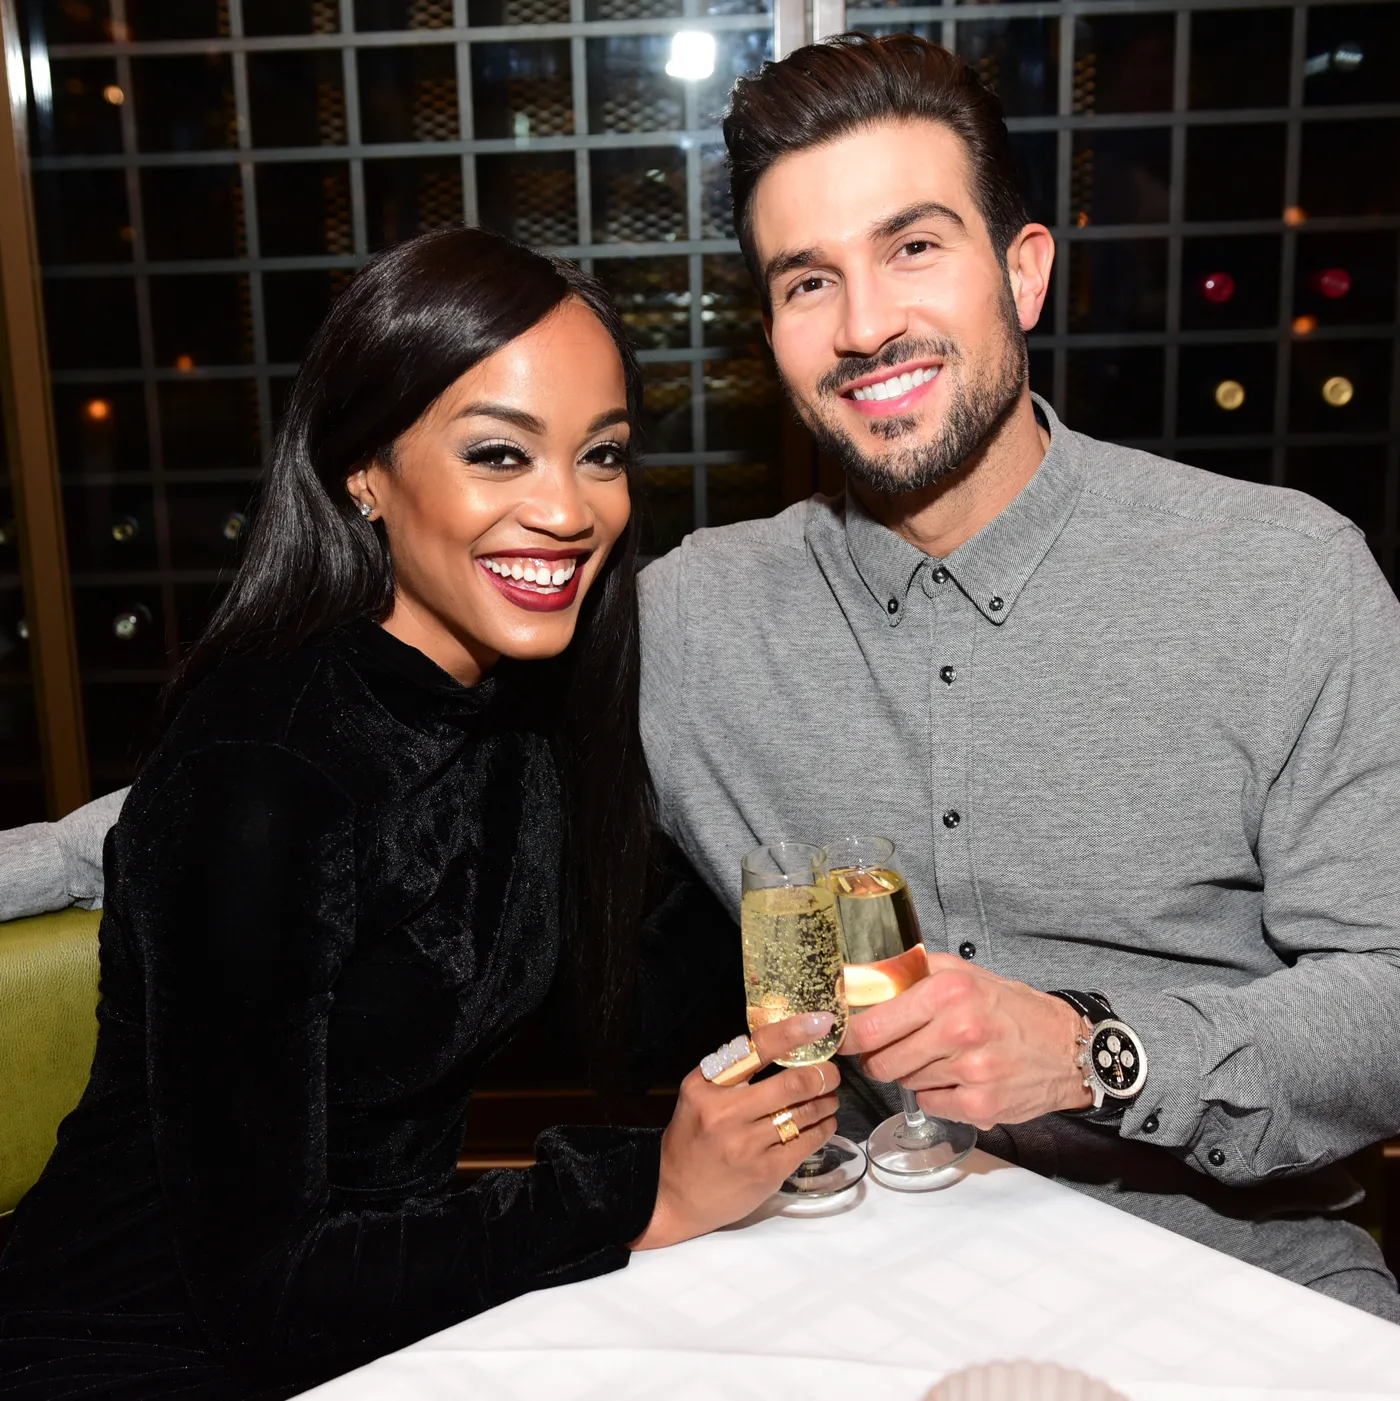 Say What Now? ‘Bachelorette’ Star Rachel Lindsay’s Estranged Husband Pleads For Support to Vacate Marital Home, Claims Ex Controls Security Cameras and He Wants Out